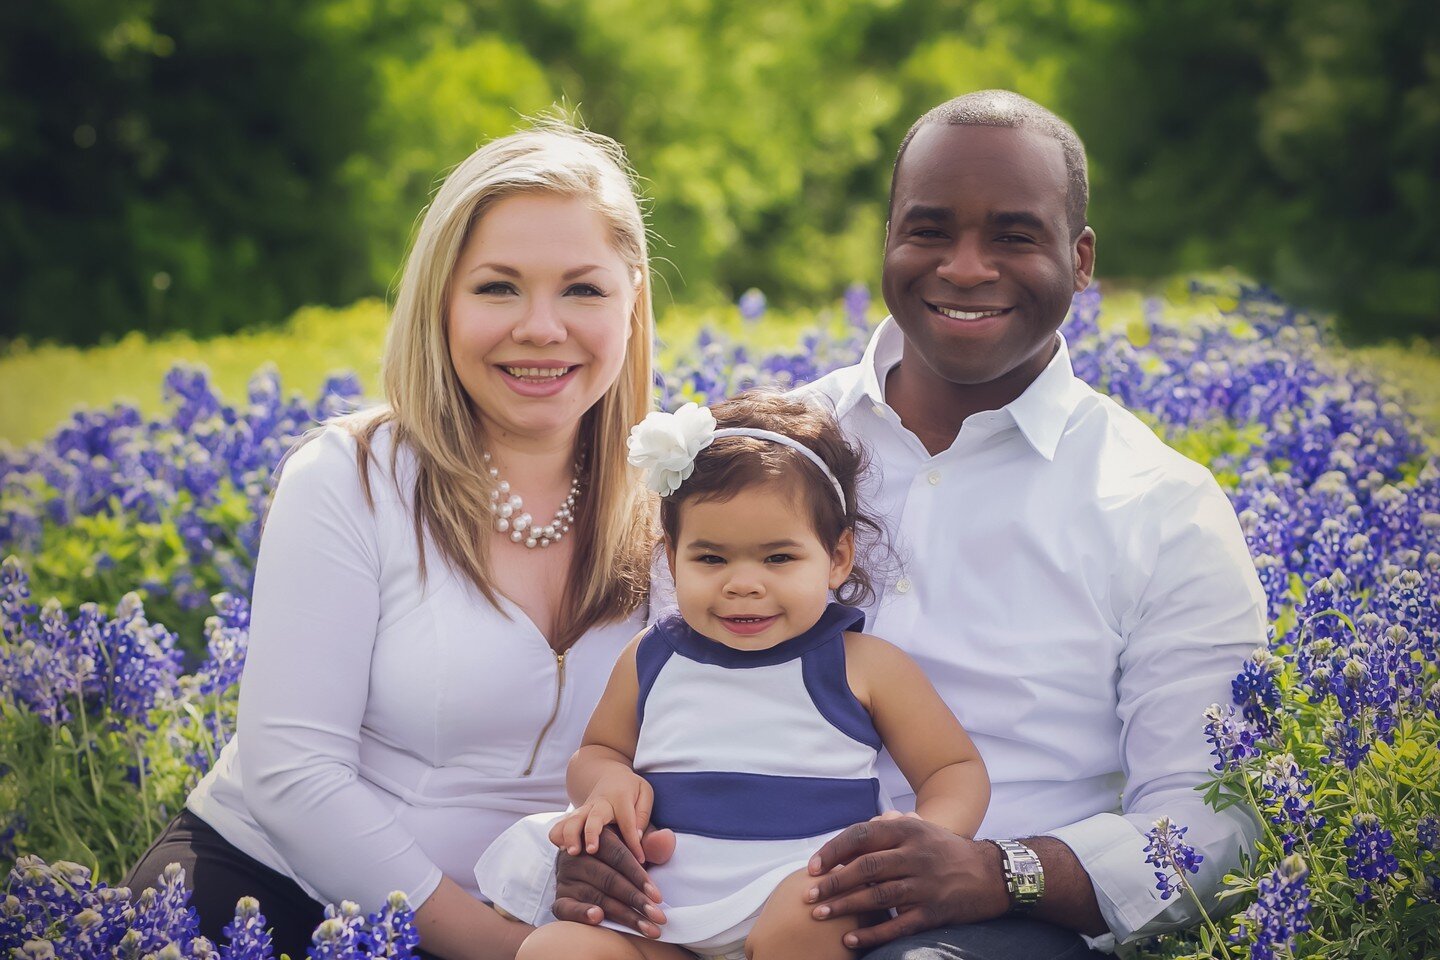 Spring is here and so are Bluebonnet Mini Sessions